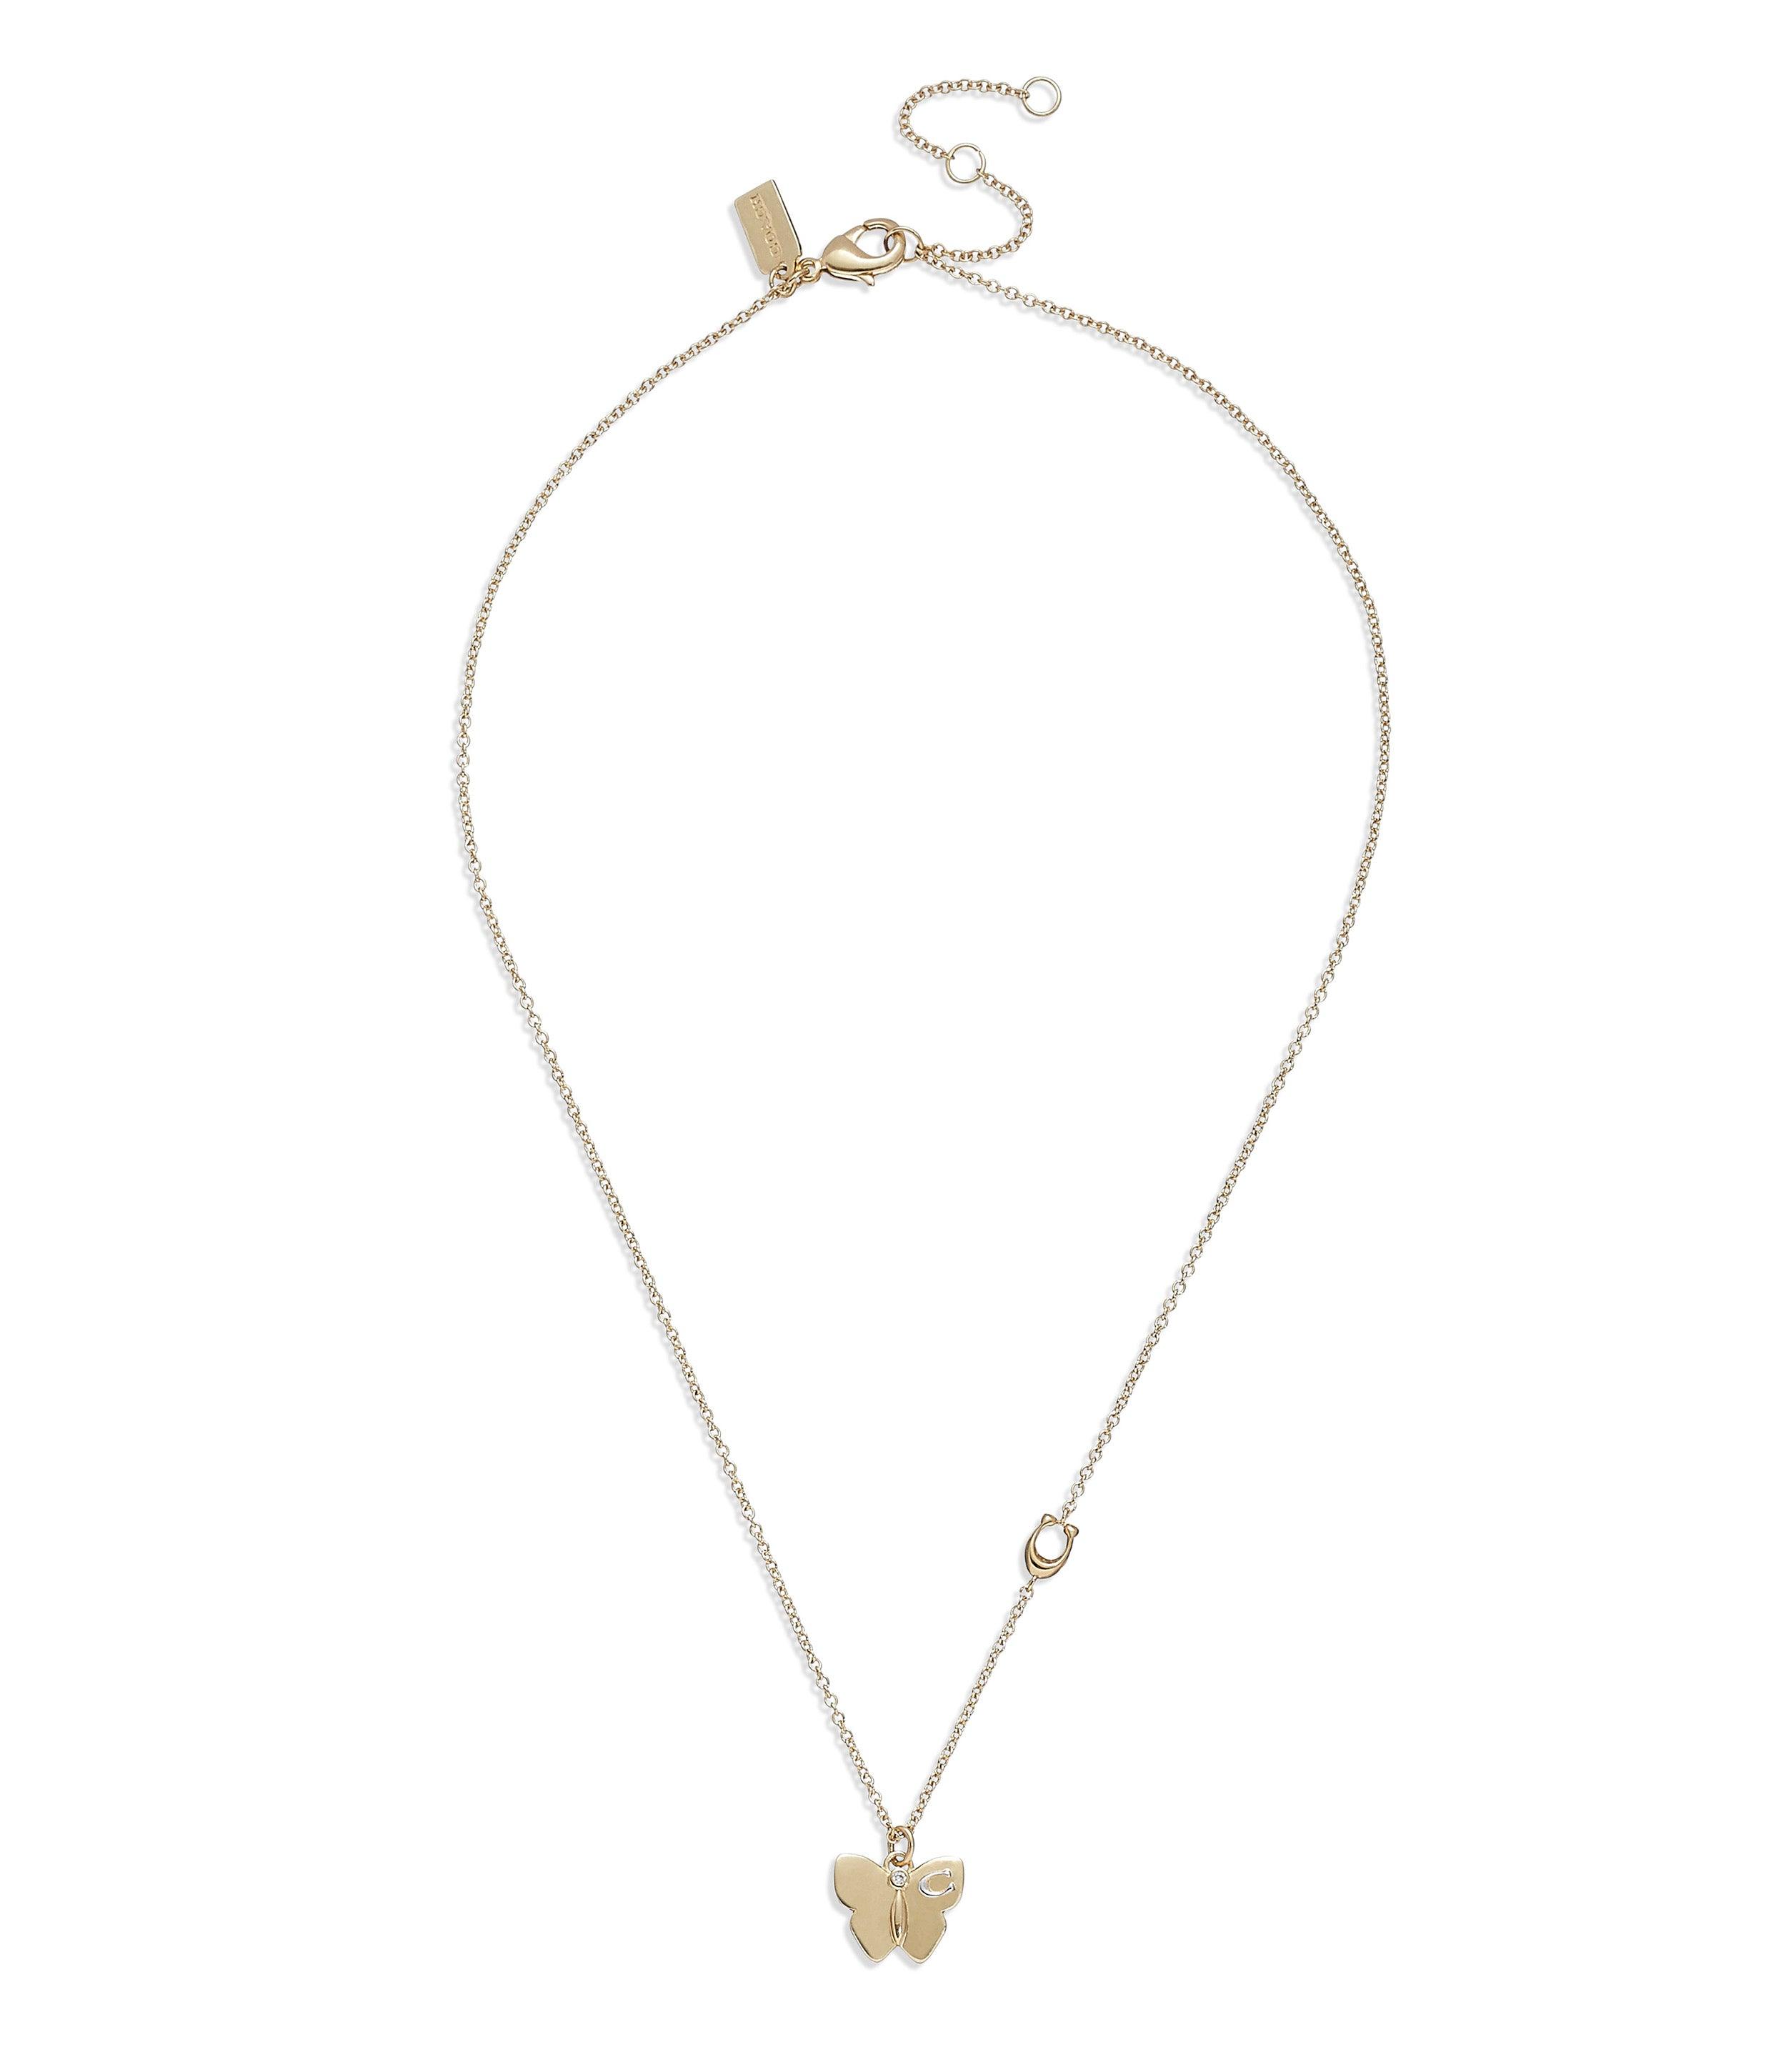 Gucci butterfly necklace - Gem